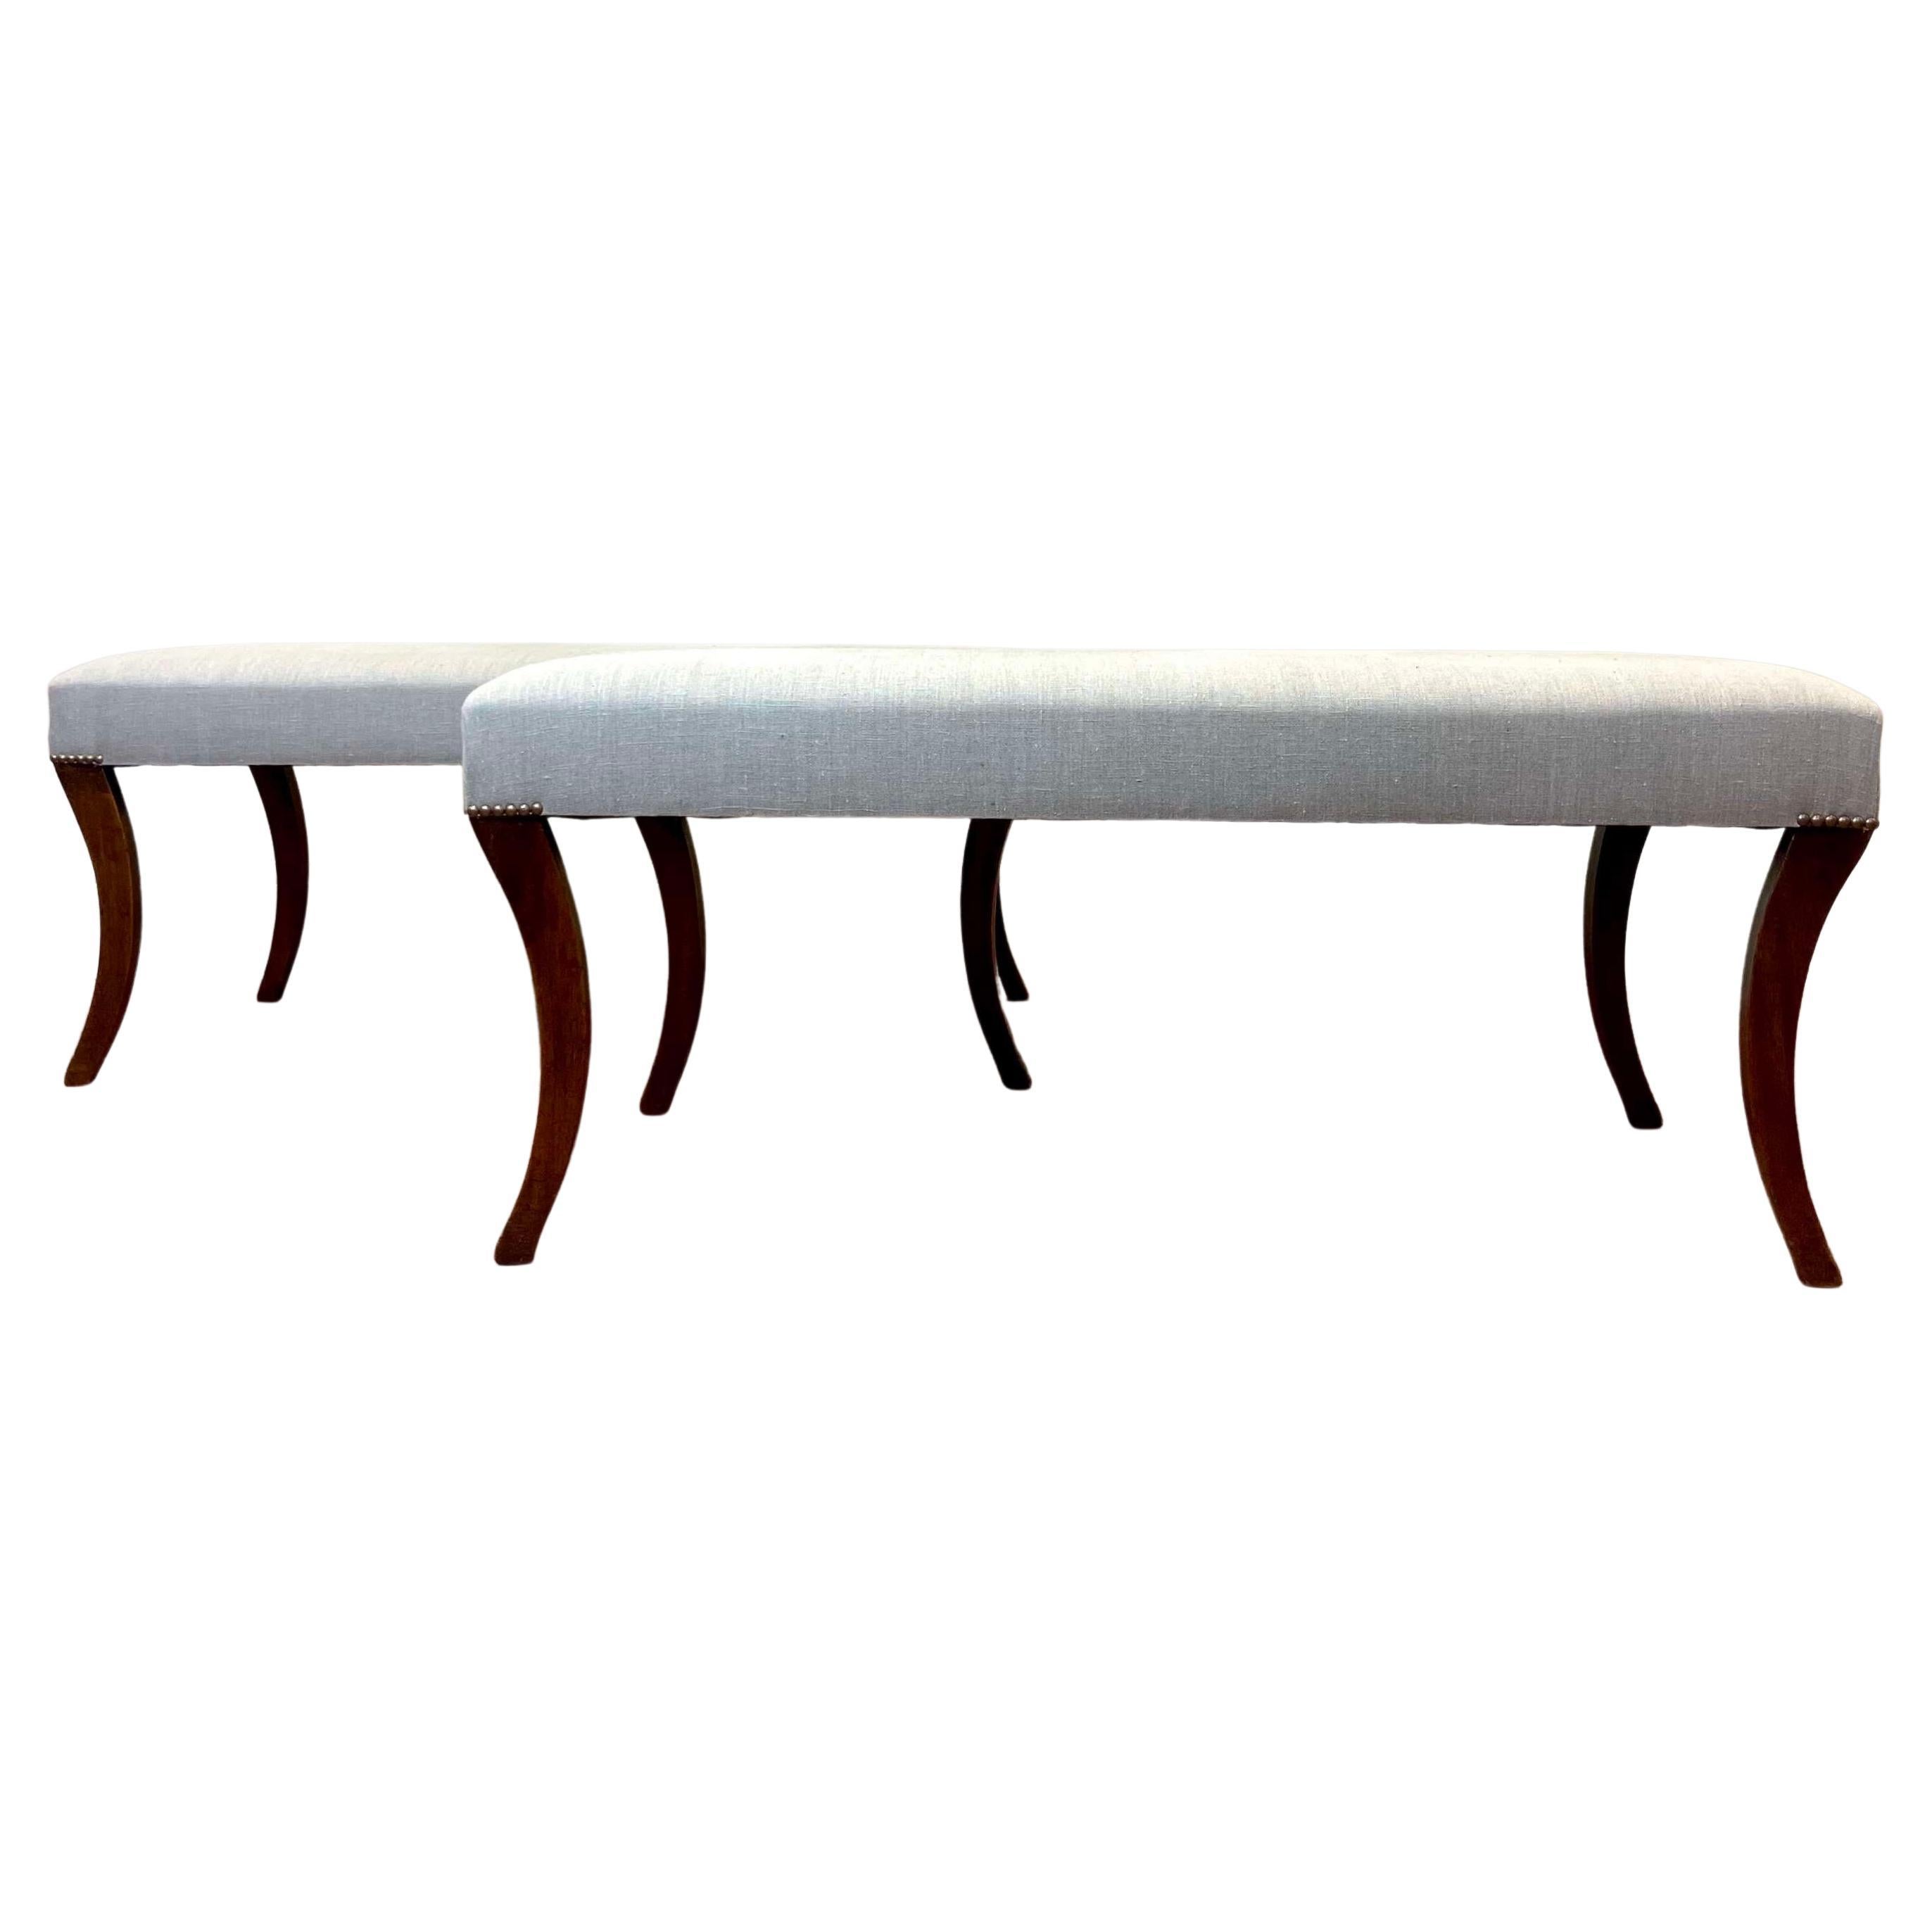 Pair of Upholstered English Sabre Leg Benches / Footstools